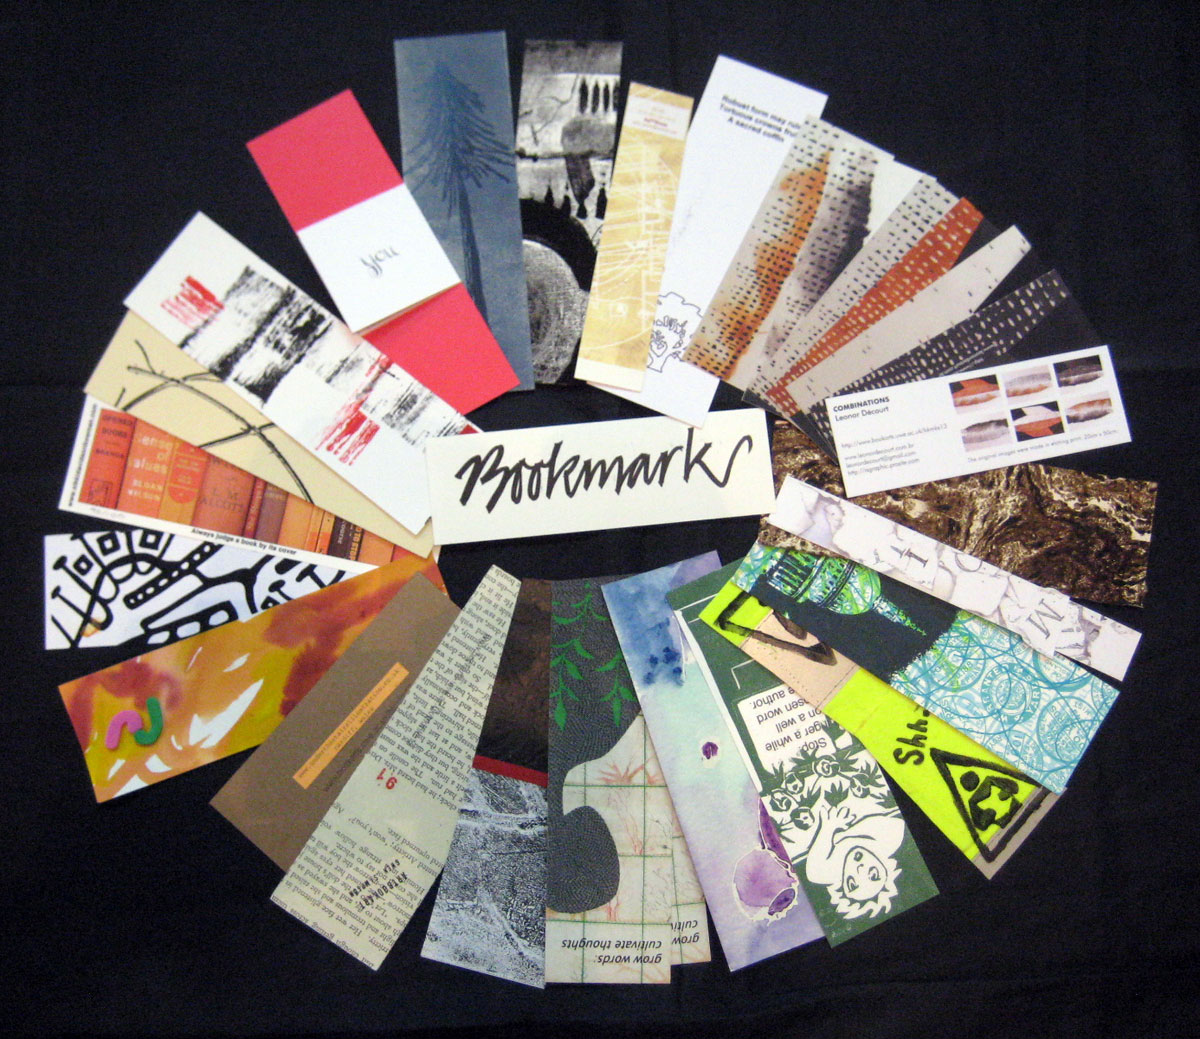 artistbookarts at deepspacegallery presents ‘Bookmarks XIII’